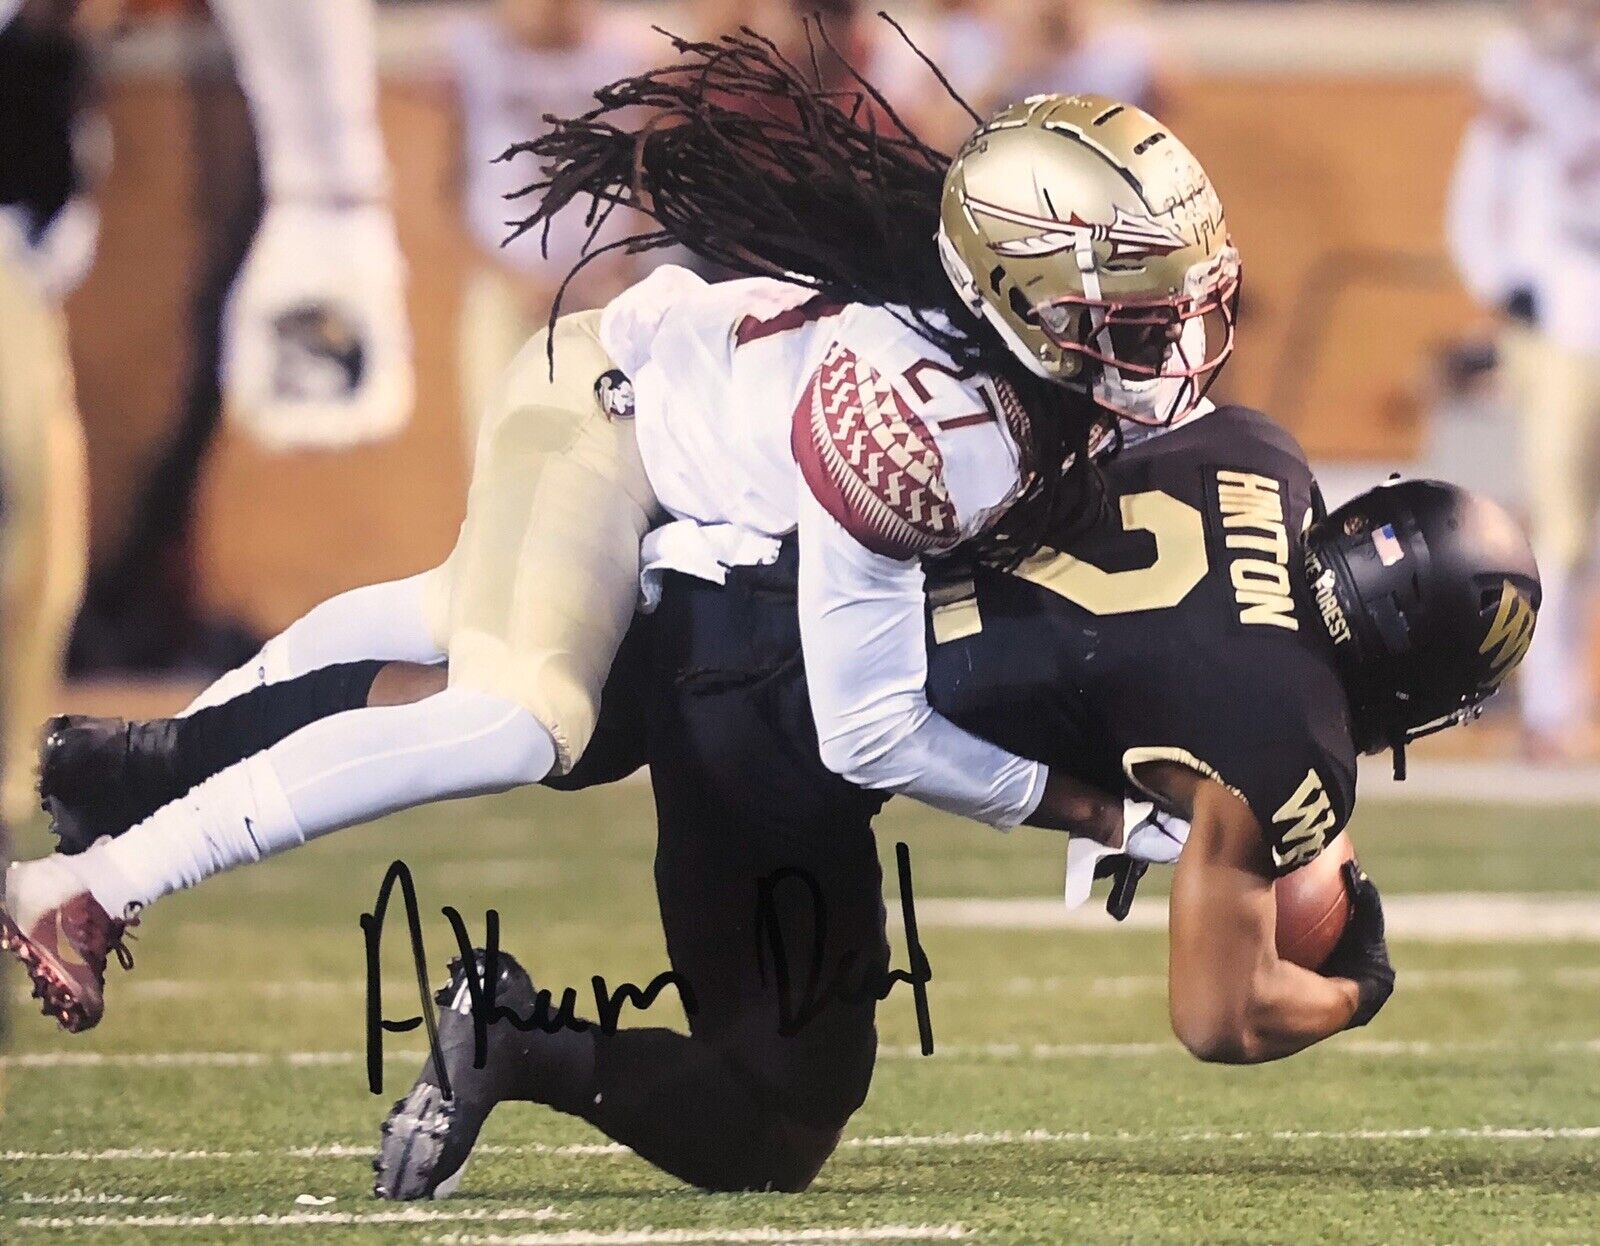 Akeem Dent Signed Autographed Florida State Seminoles 8x10 Photo Poster painting Coa